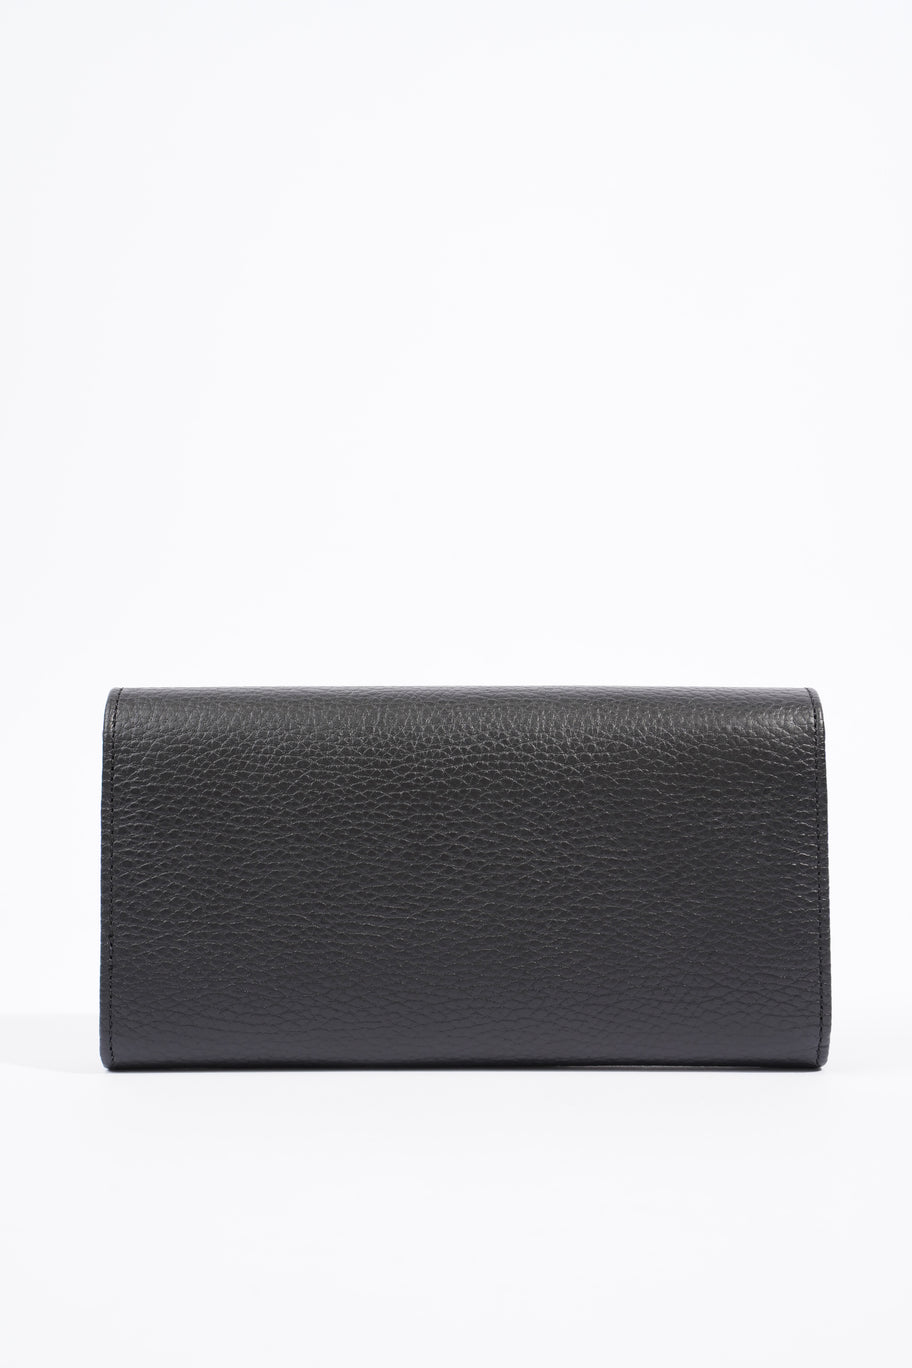 GG Marmont Long Wallet Black Calfskin Leather Image 4